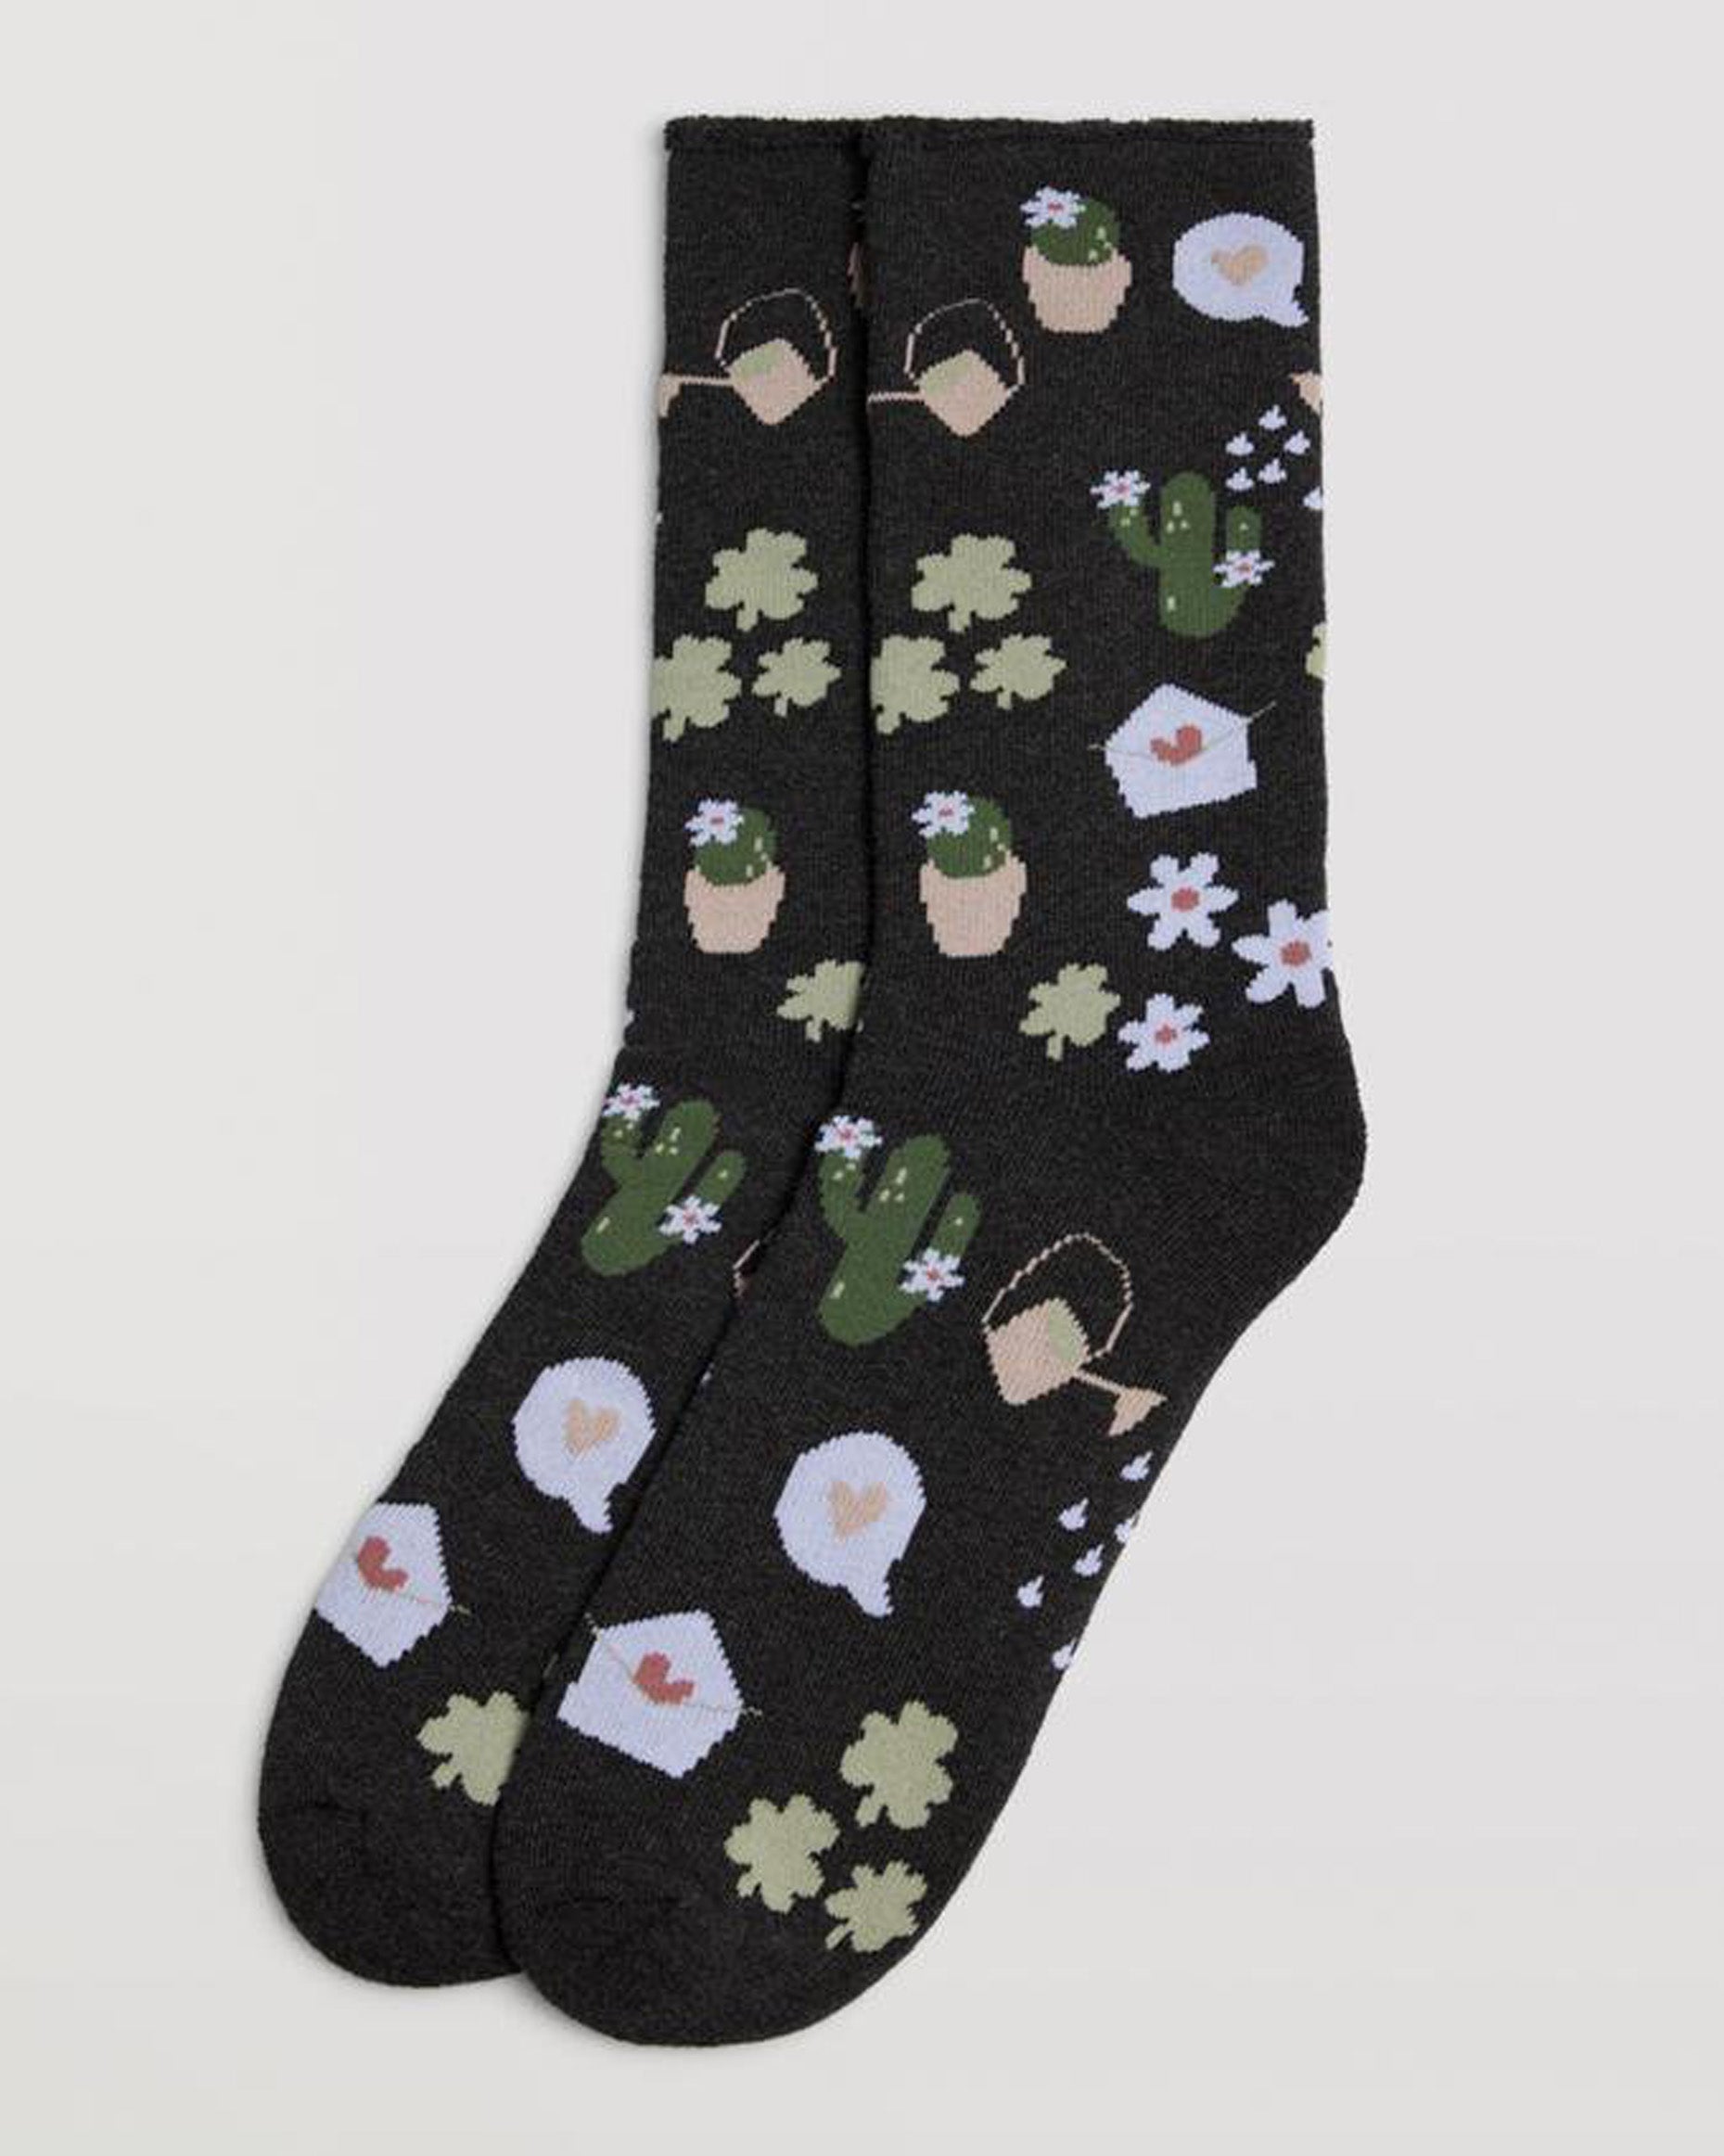 Ysabel Mora 12885 Gardener Sock - Black cotton thermal socks with a terry lining and all over gardener themed pattern in shades of green, pink, peach and white, shaped heel and no cuff comfort top.